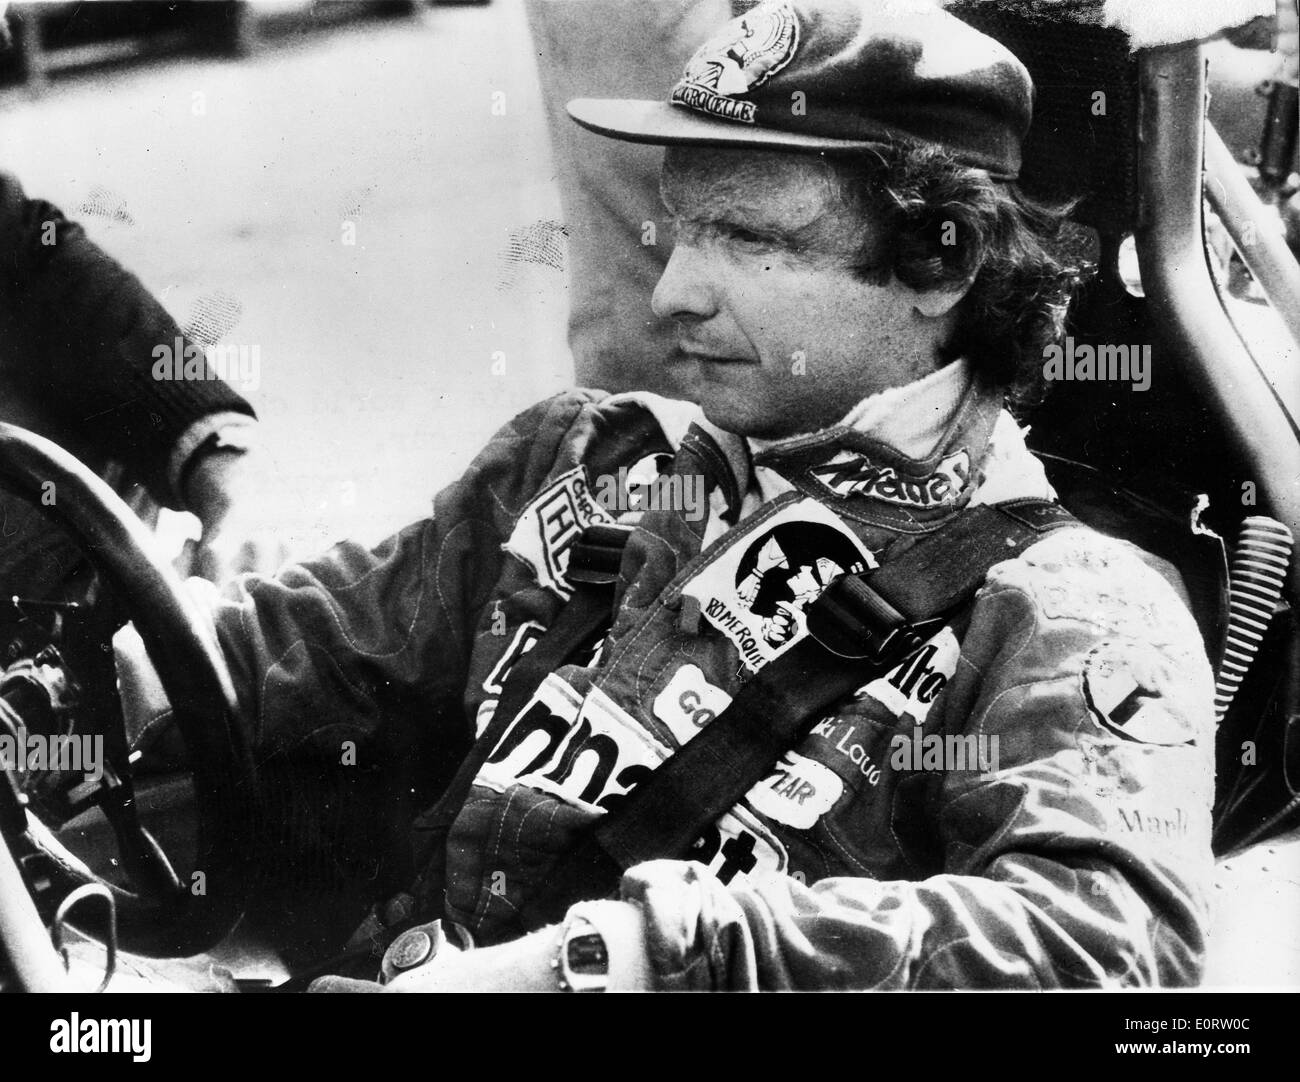 Racer Niki Lauda in his car before a race Stock Photo